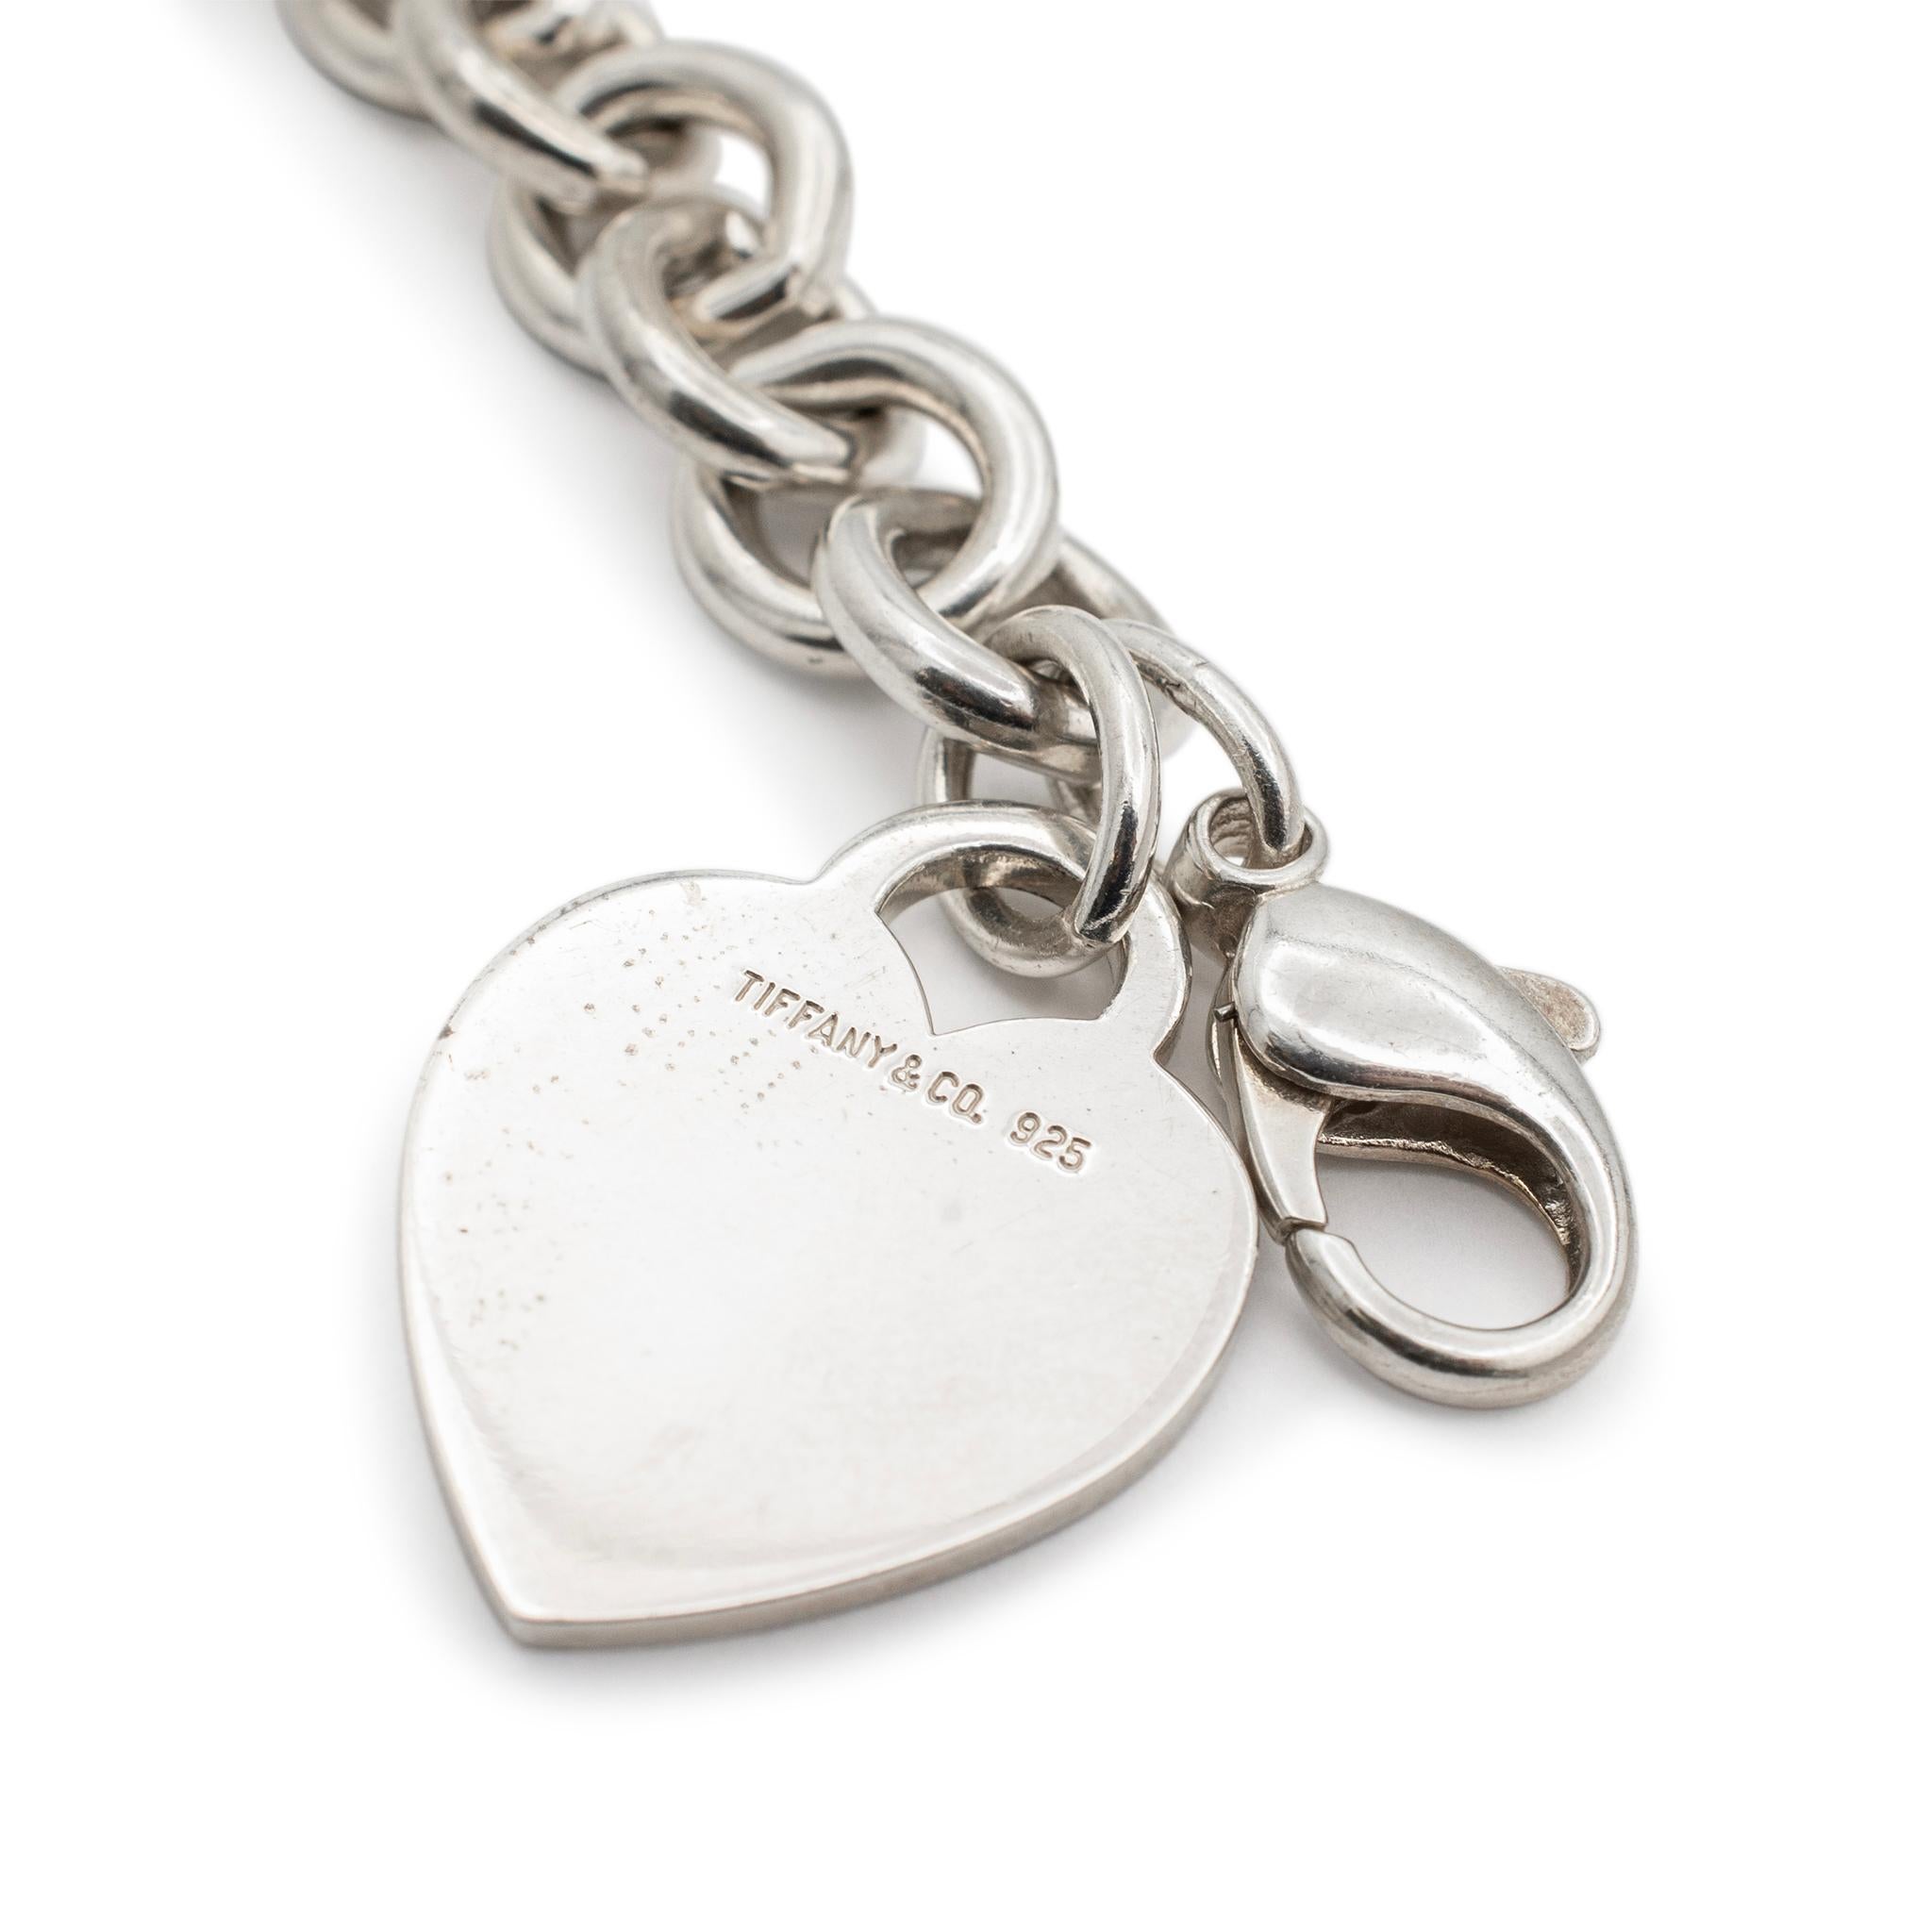 Brand: Tiffany & Co.

Metal Type: 925 Sterling Silver 

Length: 6.50 inches

Weight: 37.40 grams

Lady's Tiffany & Co. polished silver, charm bracelet. The 